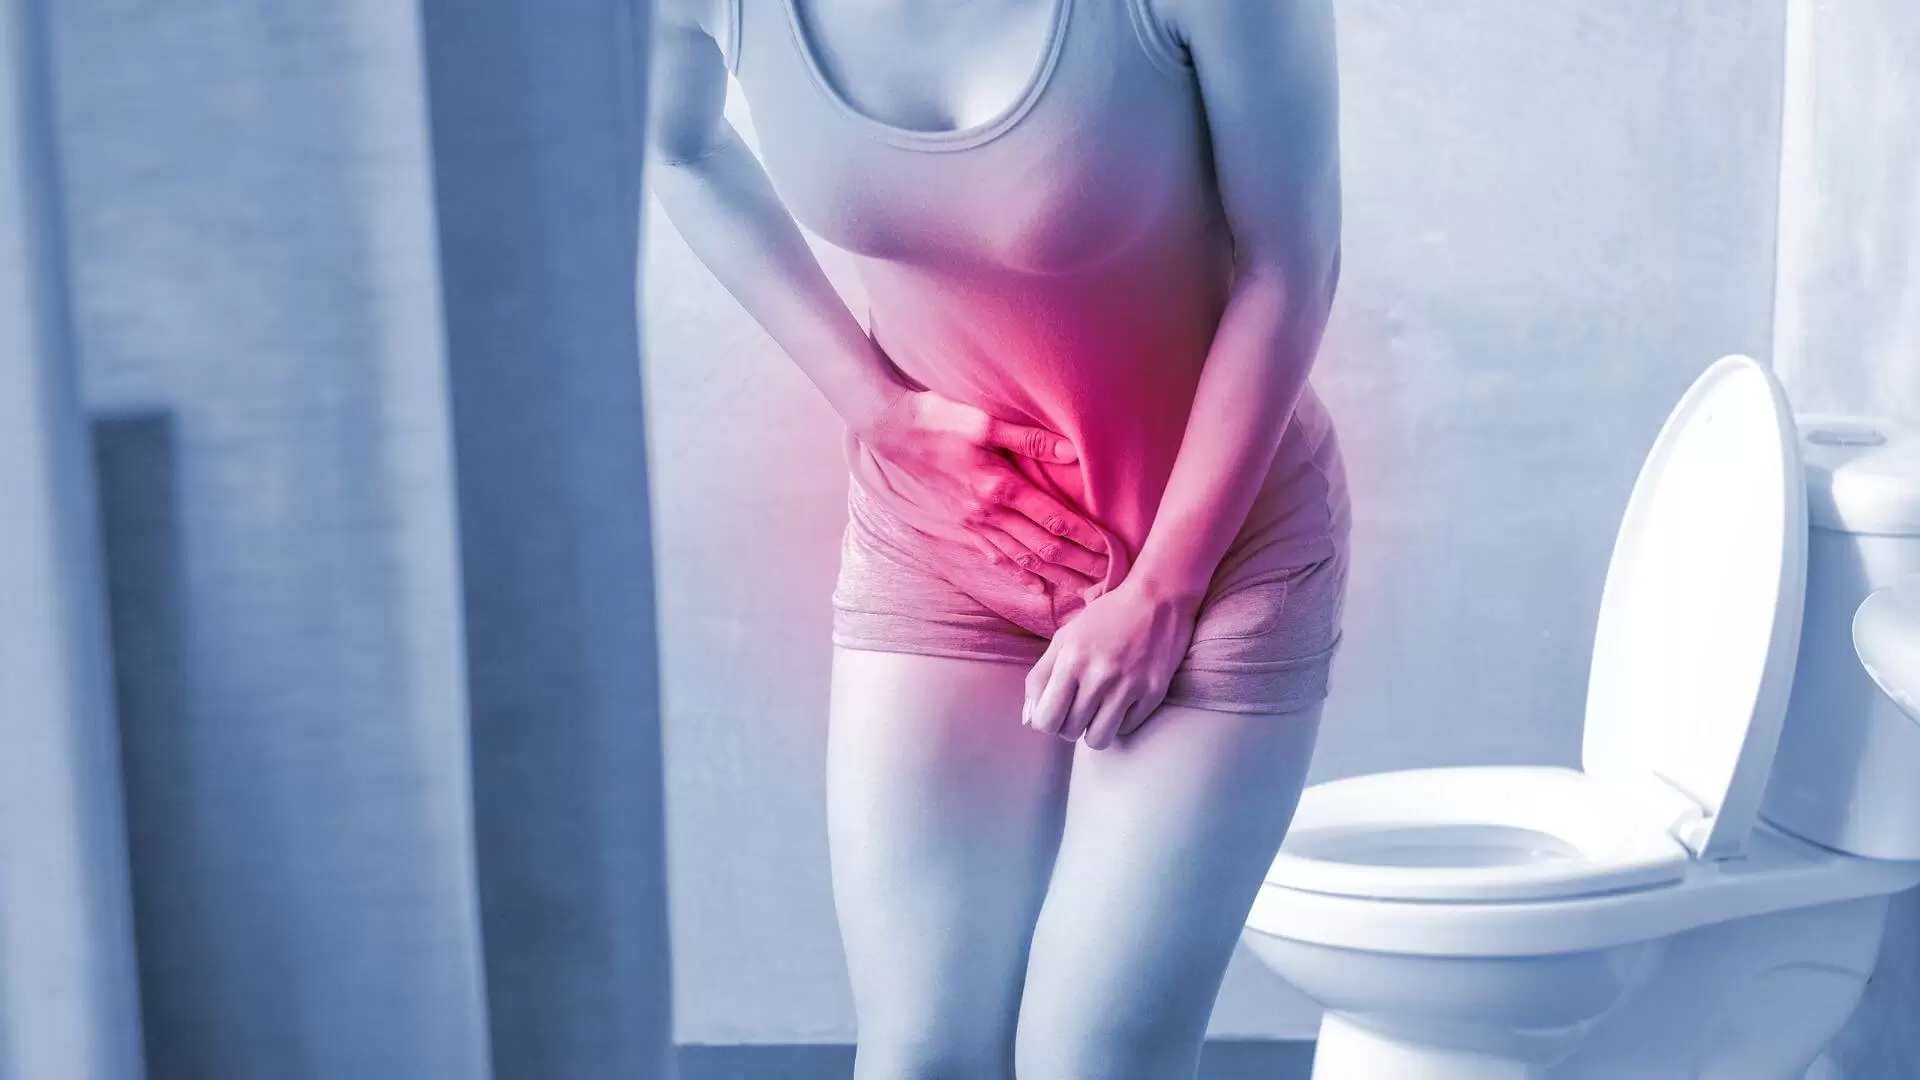 Leakage of Urine, A Problem That Not only Affects Women of Menopausal Age (1)